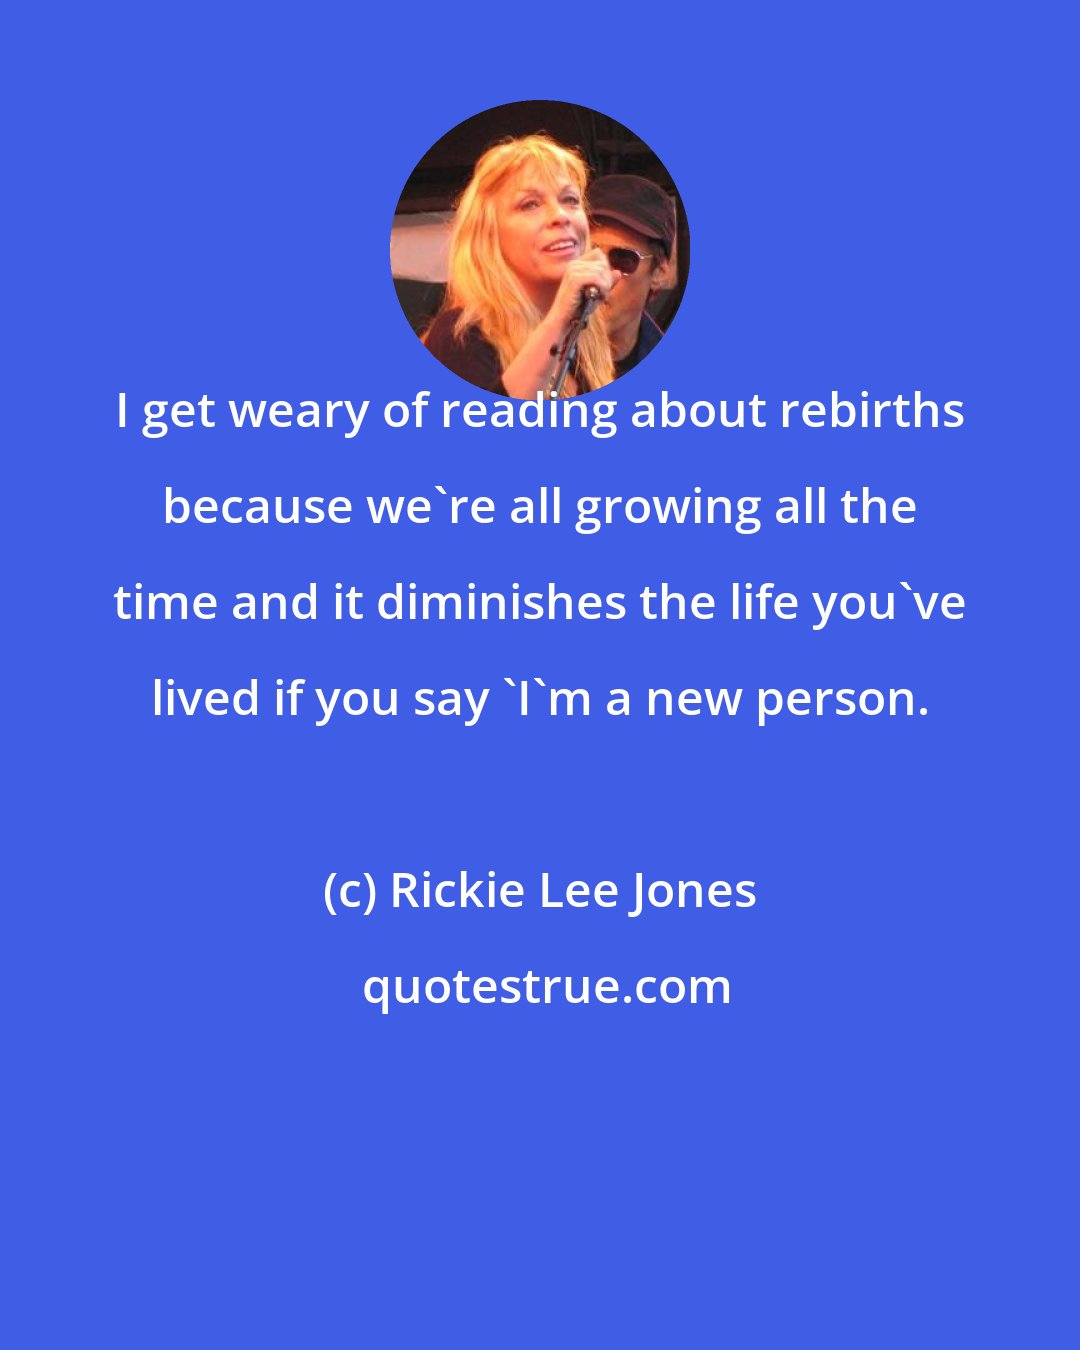 Rickie Lee Jones: I get weary of reading about rebirths because we're all growing all the time and it diminishes the life you've lived if you say 'I'm a new person.